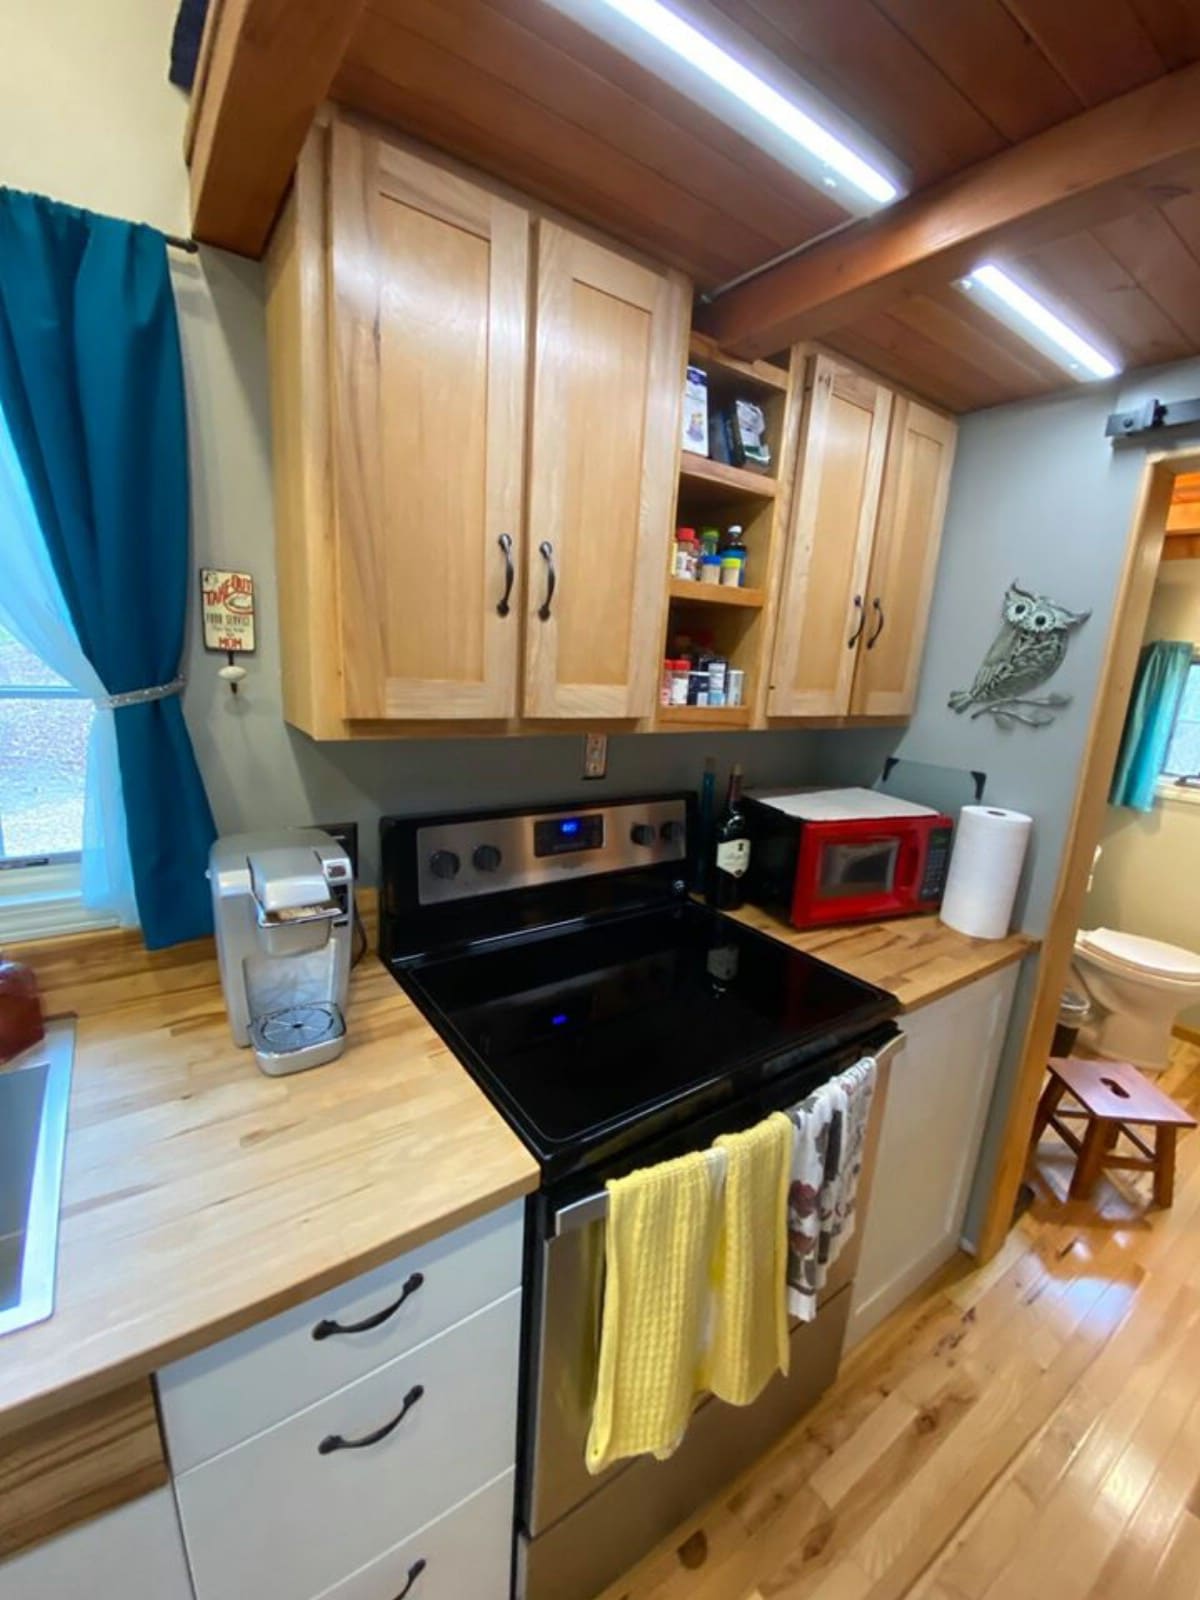 Range in tiny home kitchen with blonde cabinet